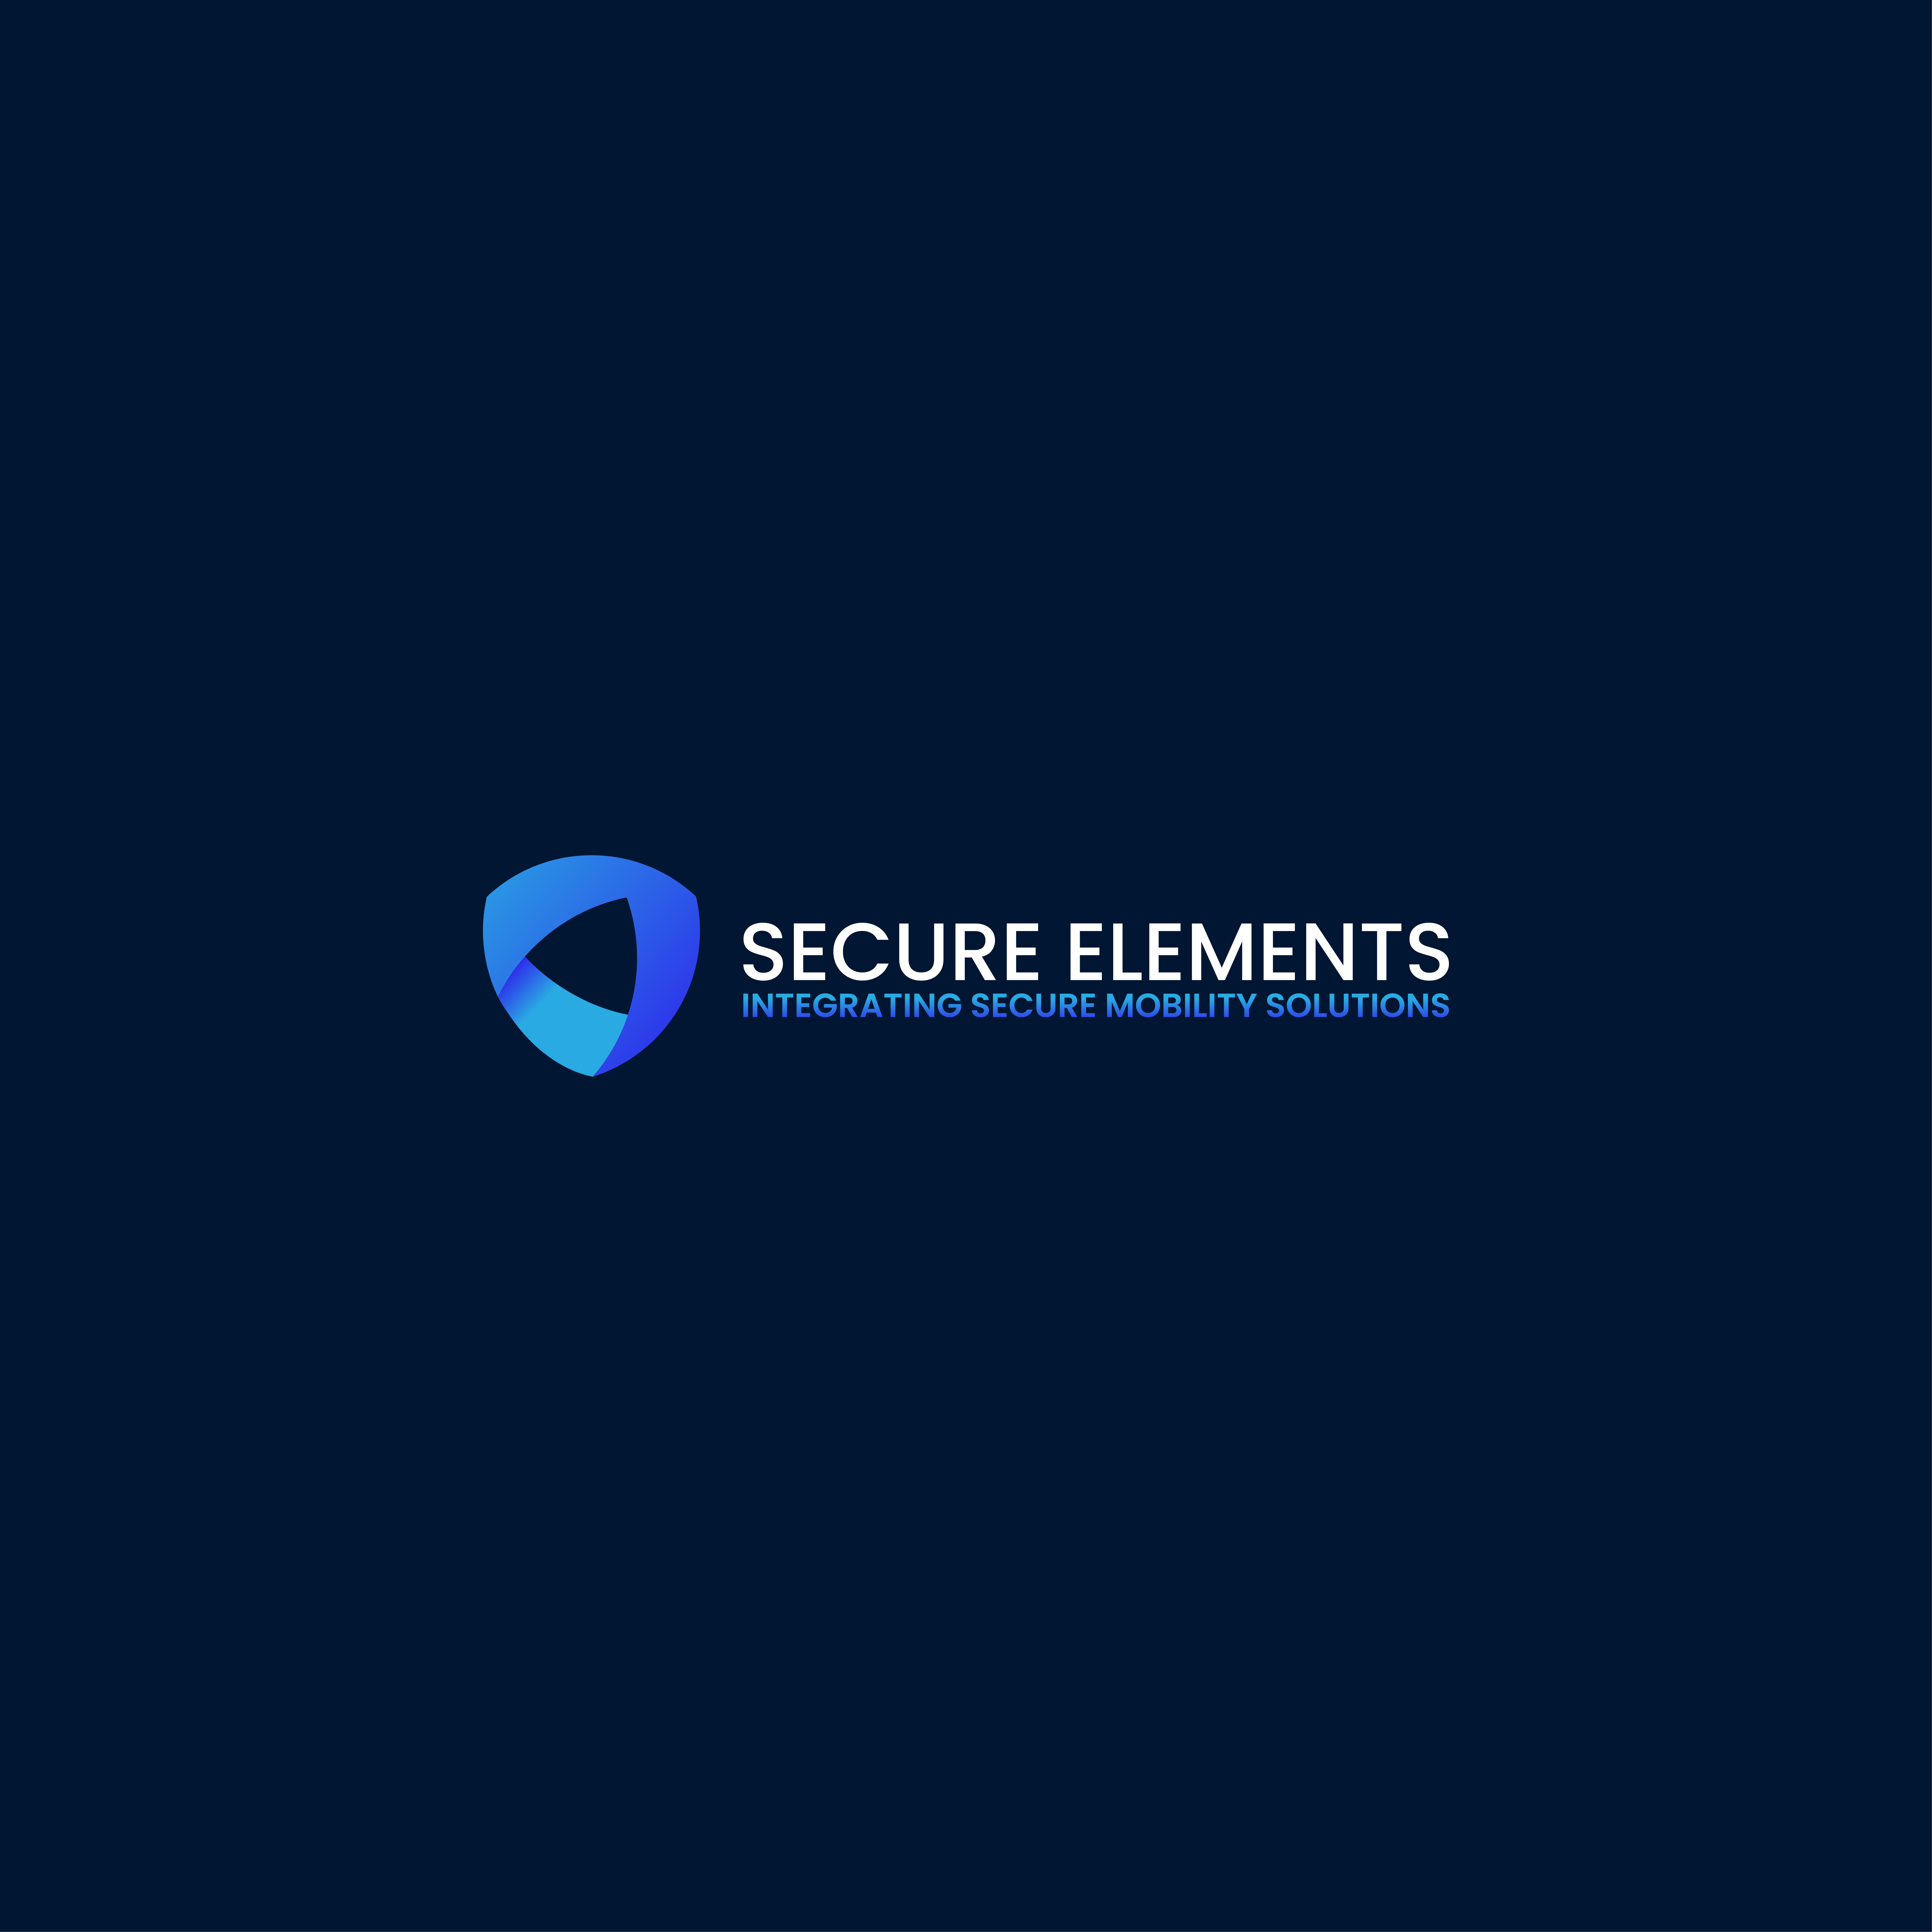 Image of Secure Elements